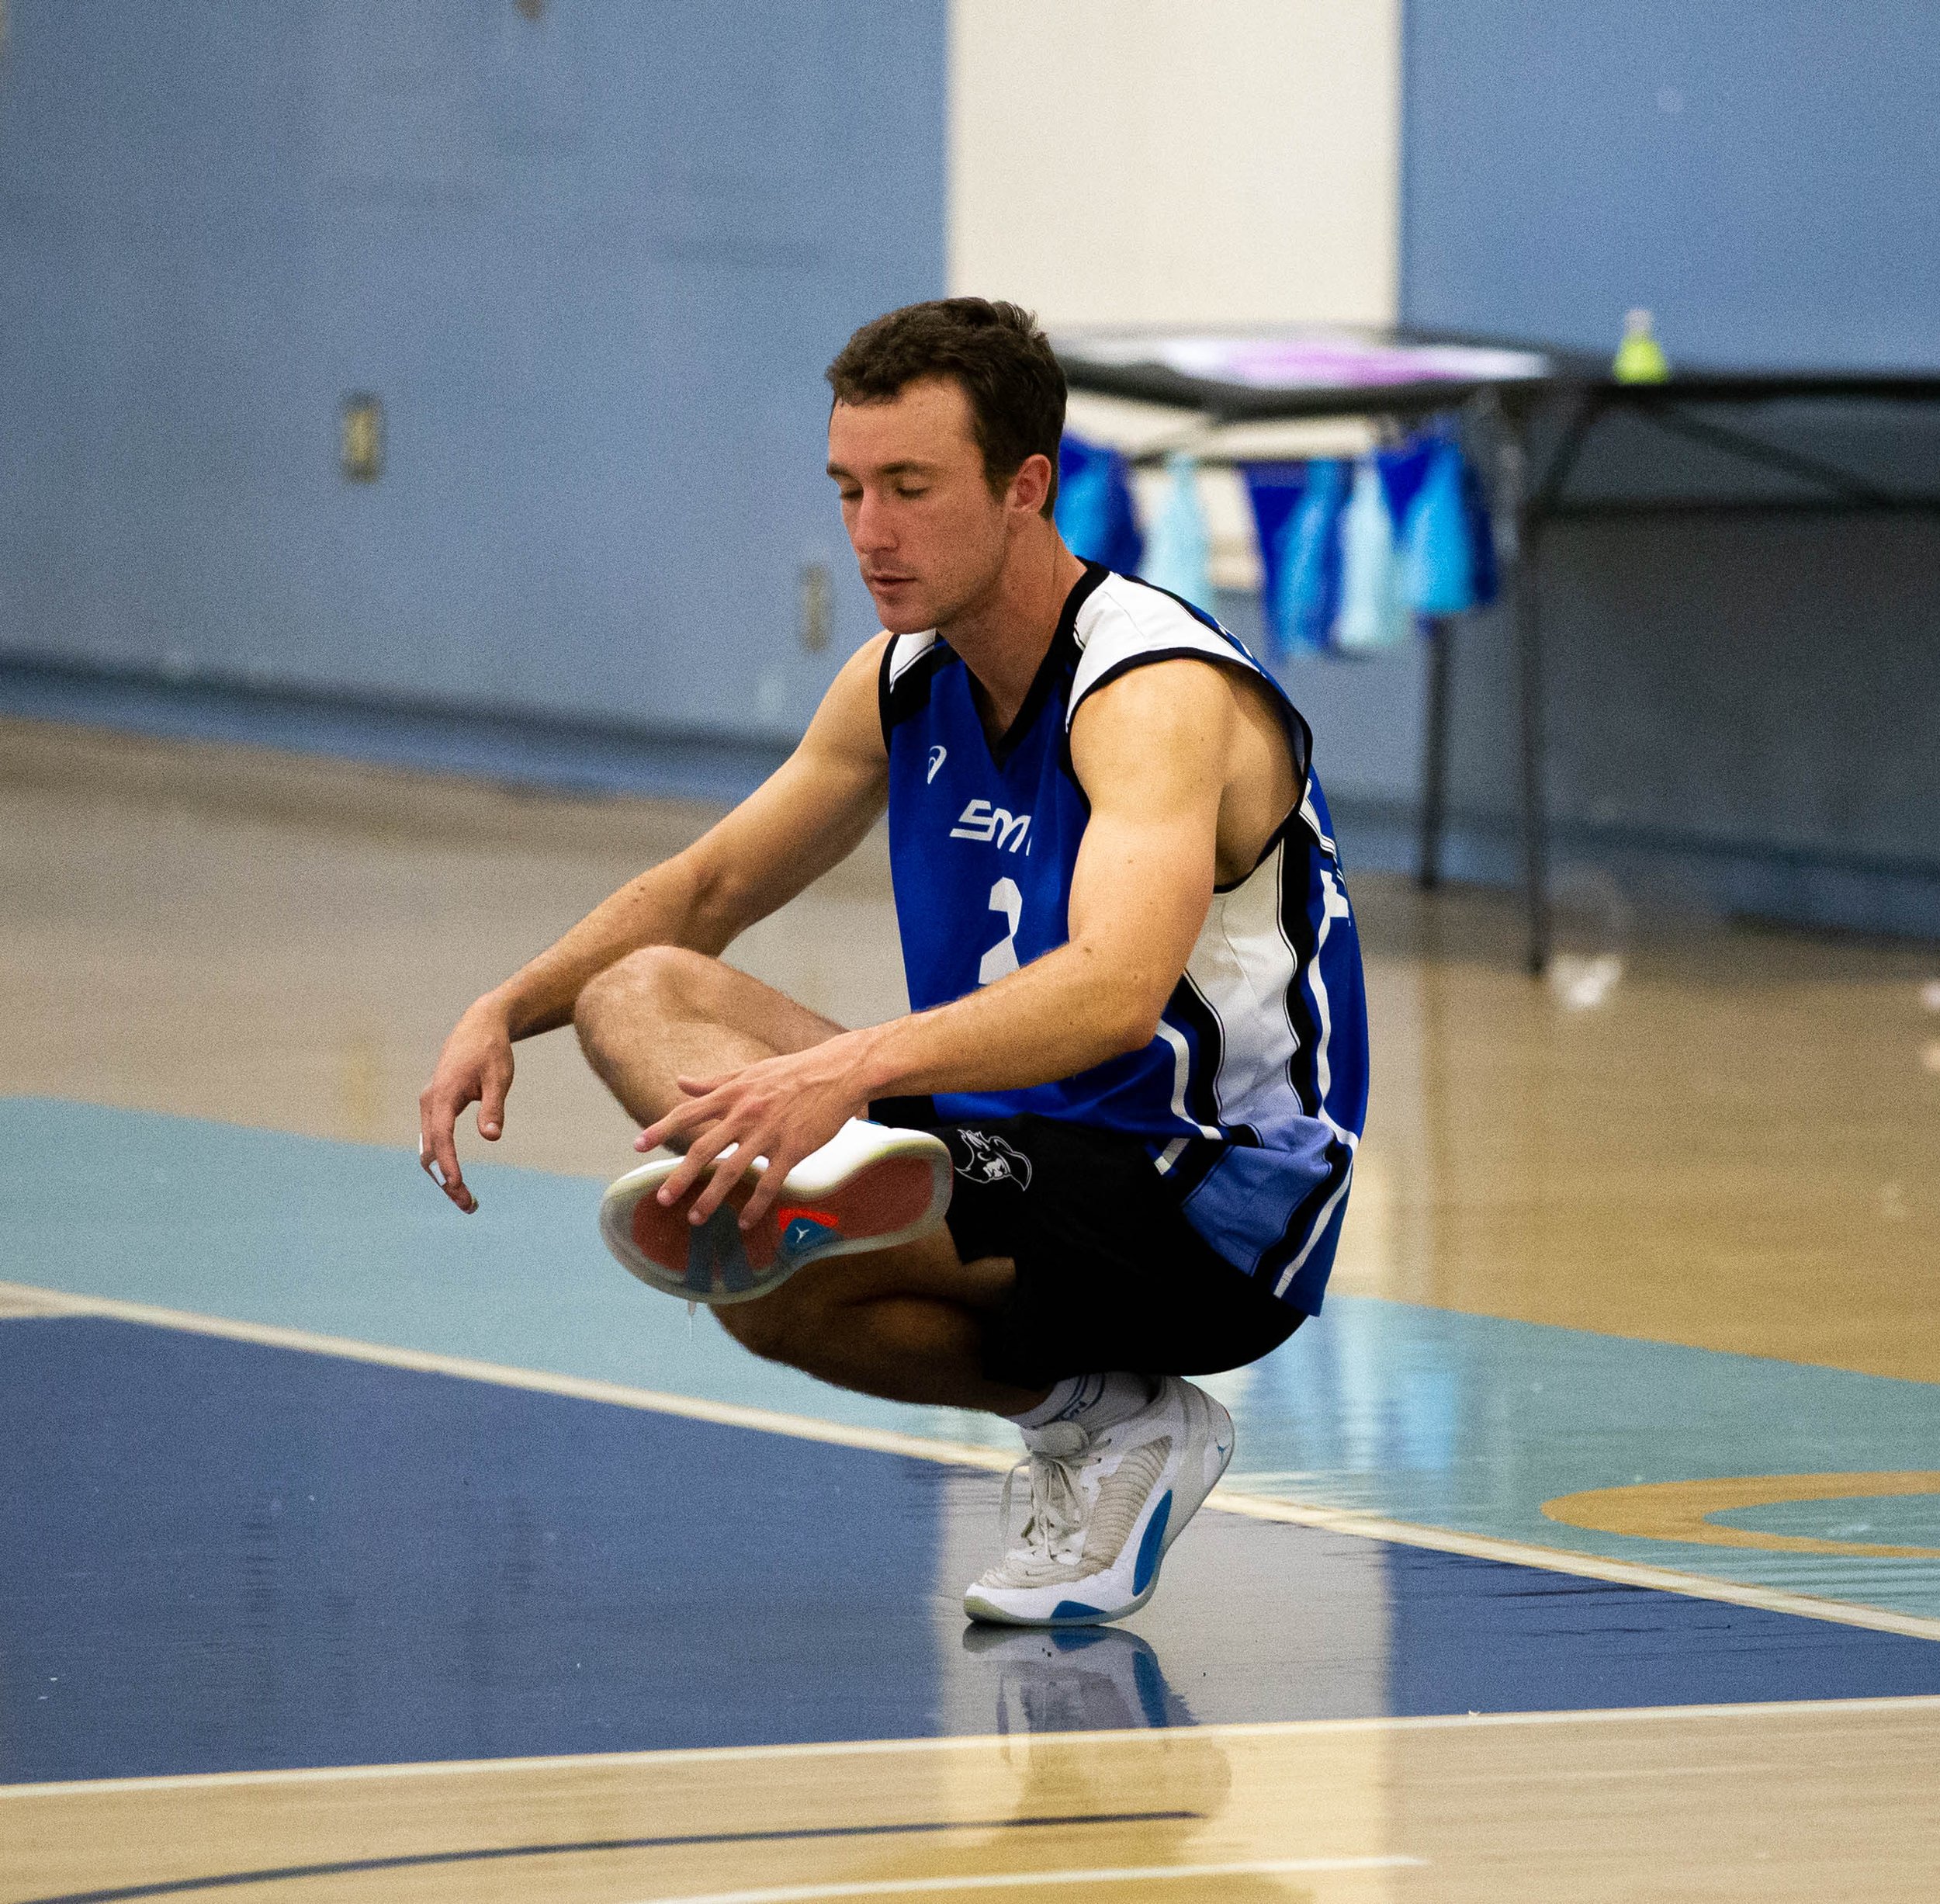  Kane Schwengel from Santa Monica College(SMC) doing the toe stand yoga pose before the start of the third period against L.A. pierce College Brahma Bulls on Wed. March 15, 2023 in the SMC Pavillion at Santa Monica, Calif. (Danilo Perez | The Corsair